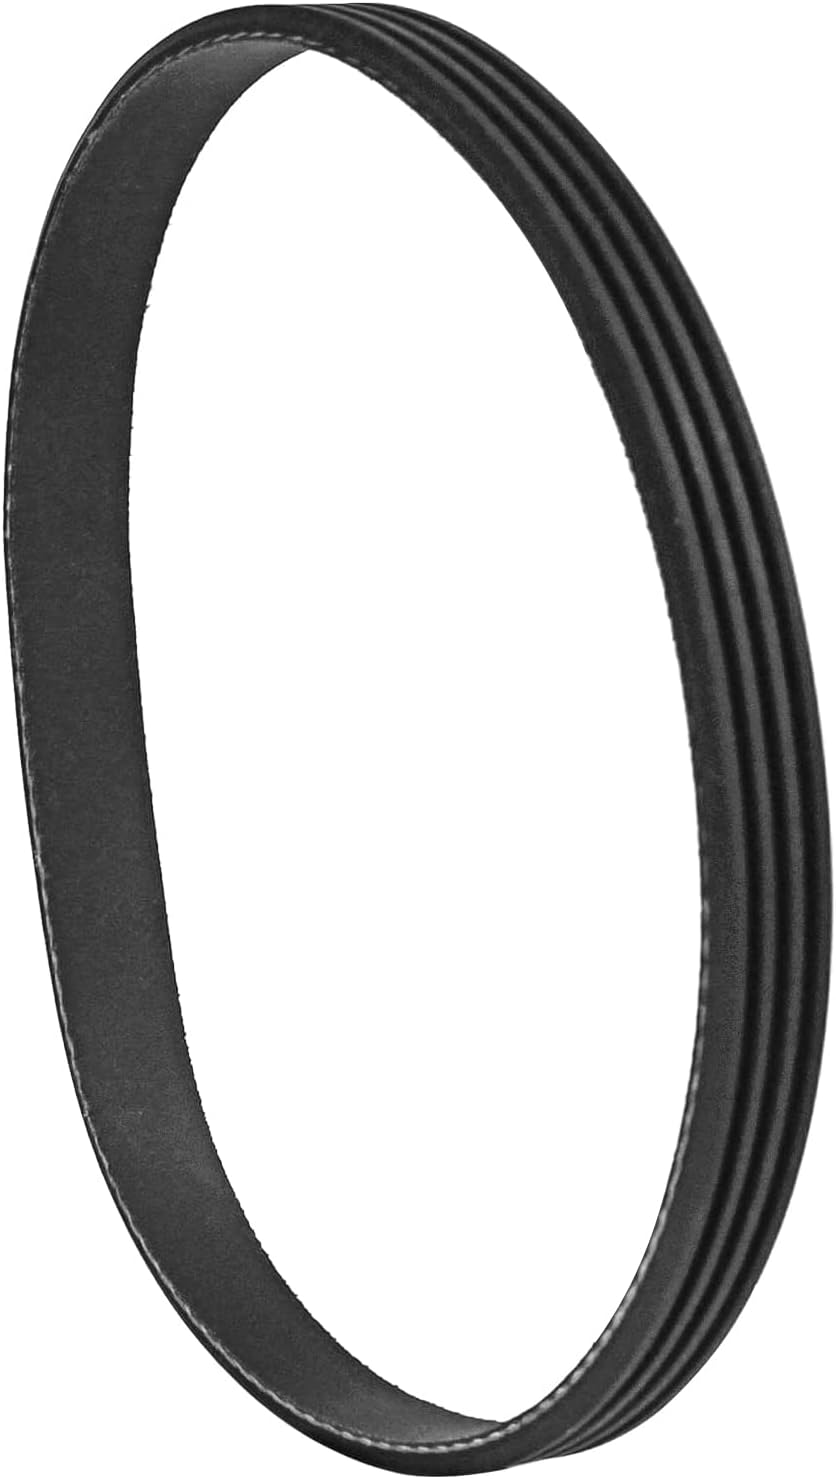 Bandsaw Drive Belt 1-JL22020003 Compatible with Sears [...]